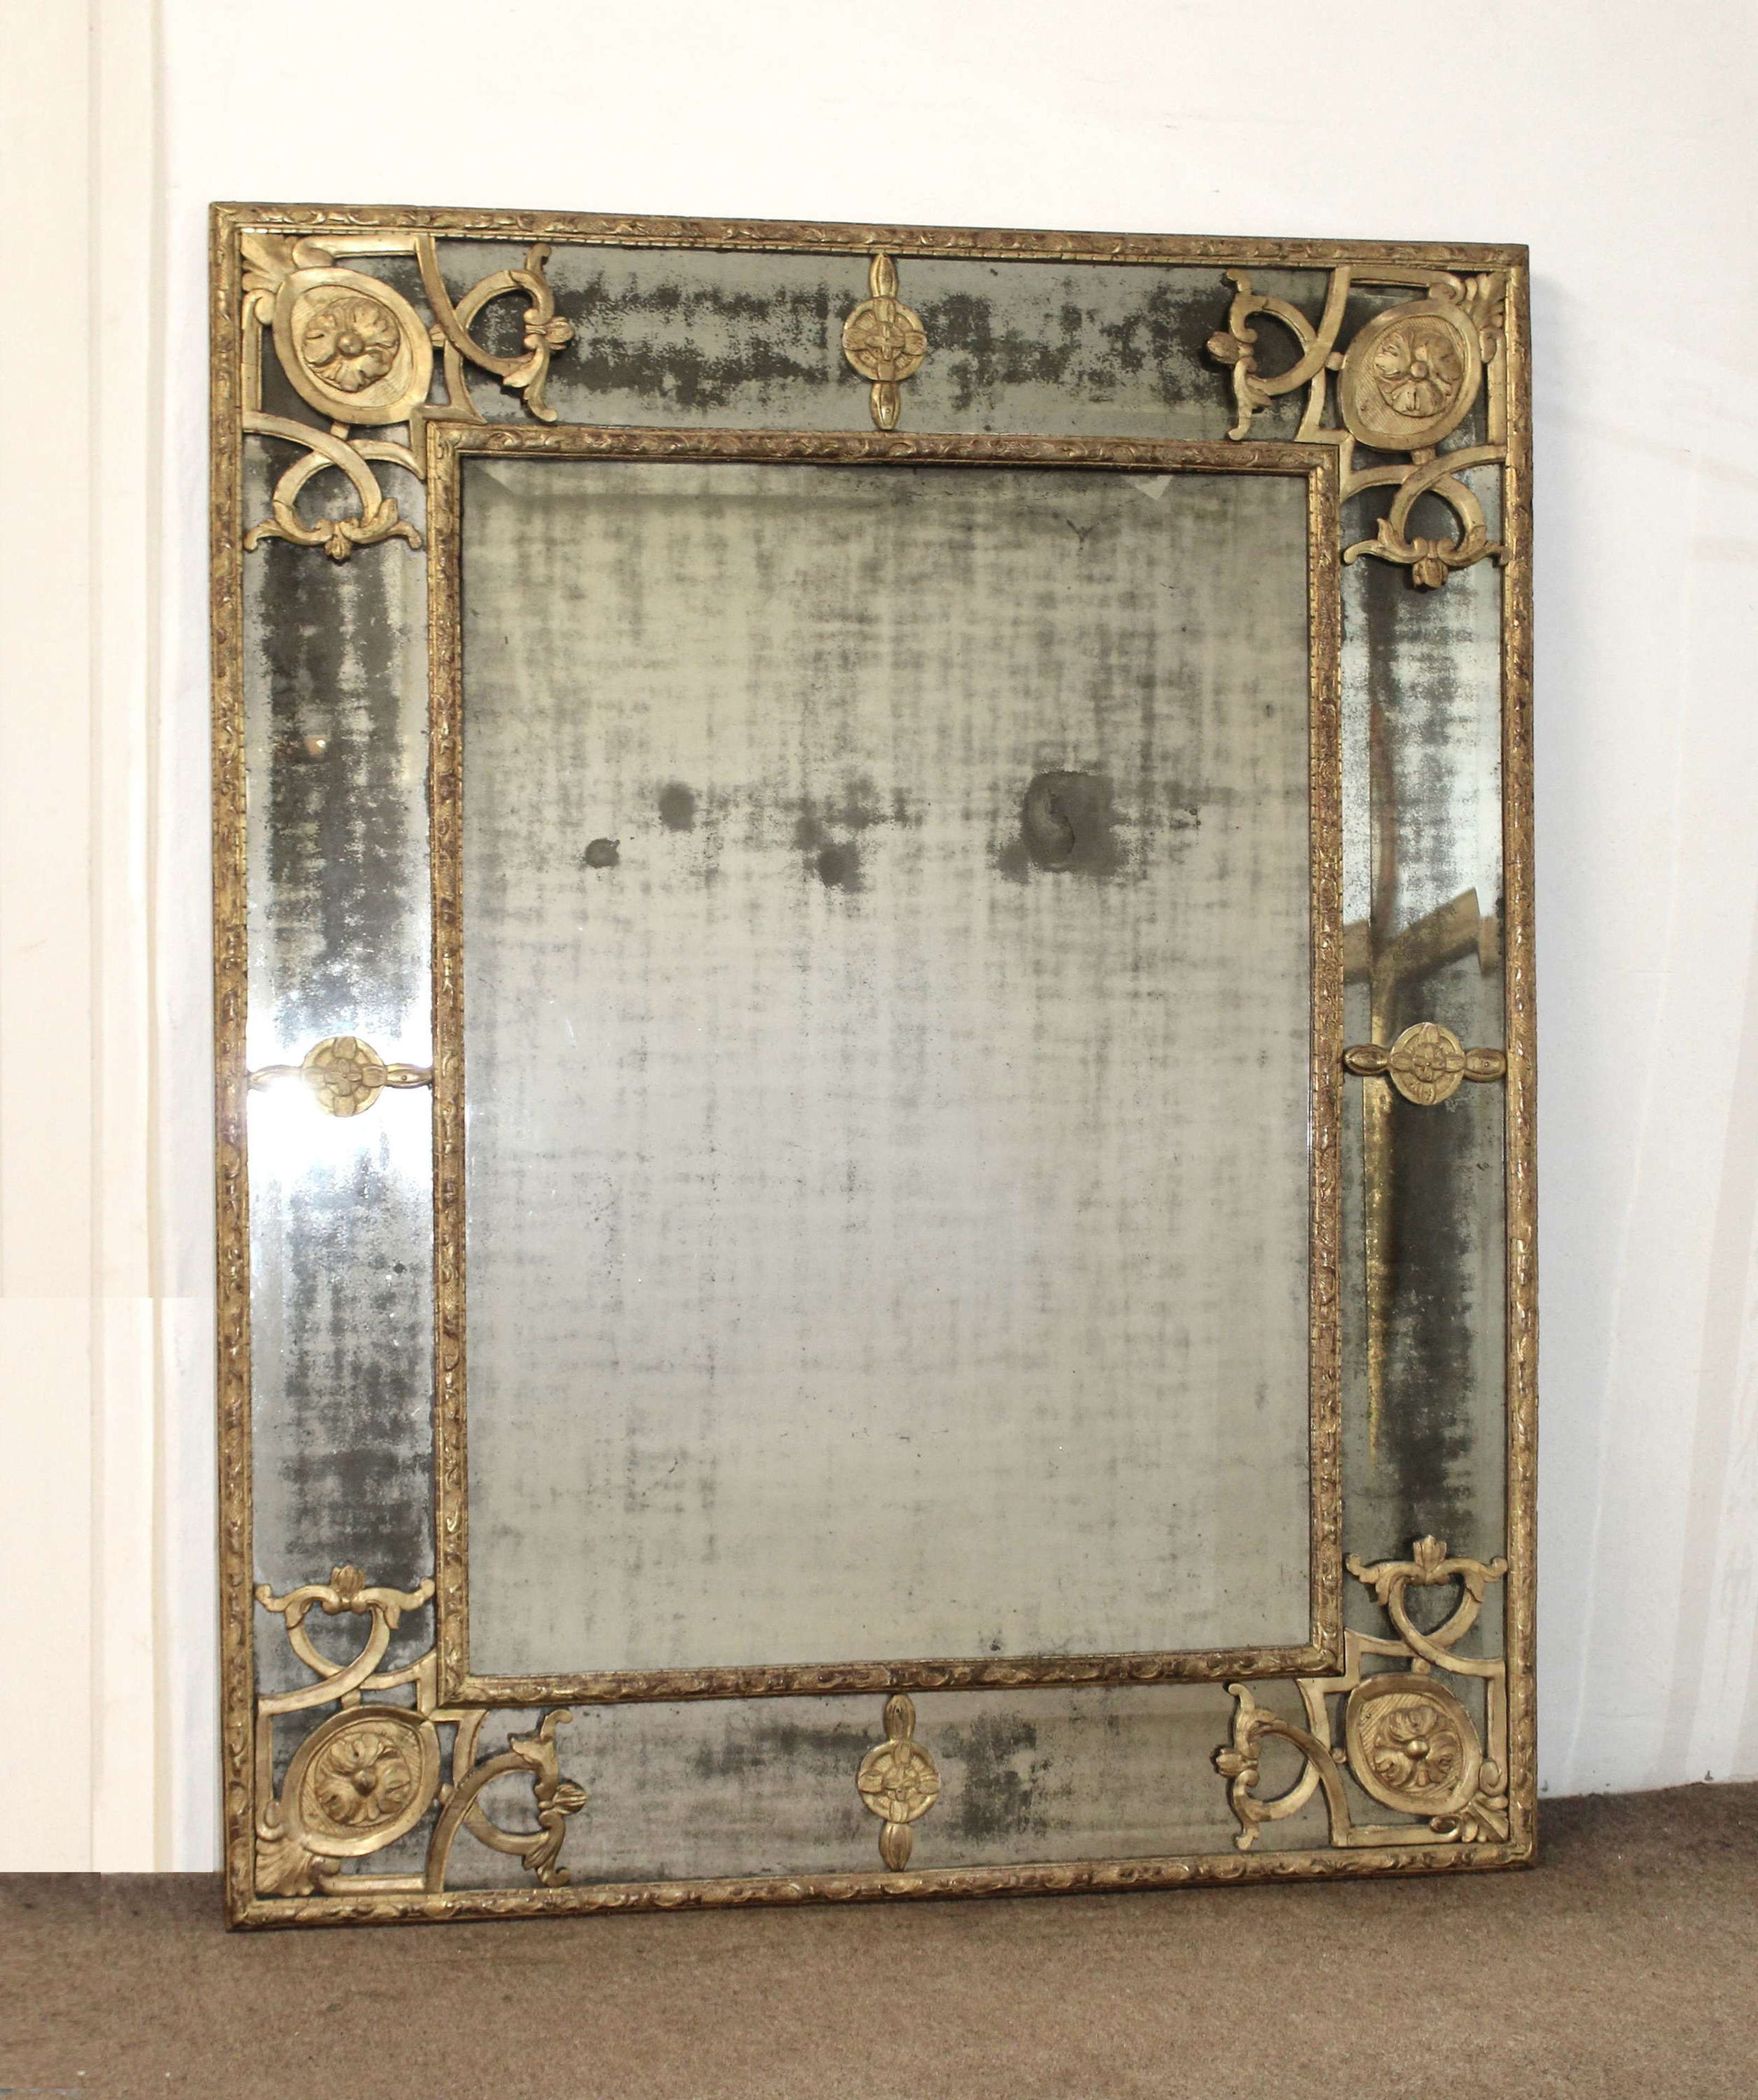 Large 18th century French margin mirror with foxed mercury glass